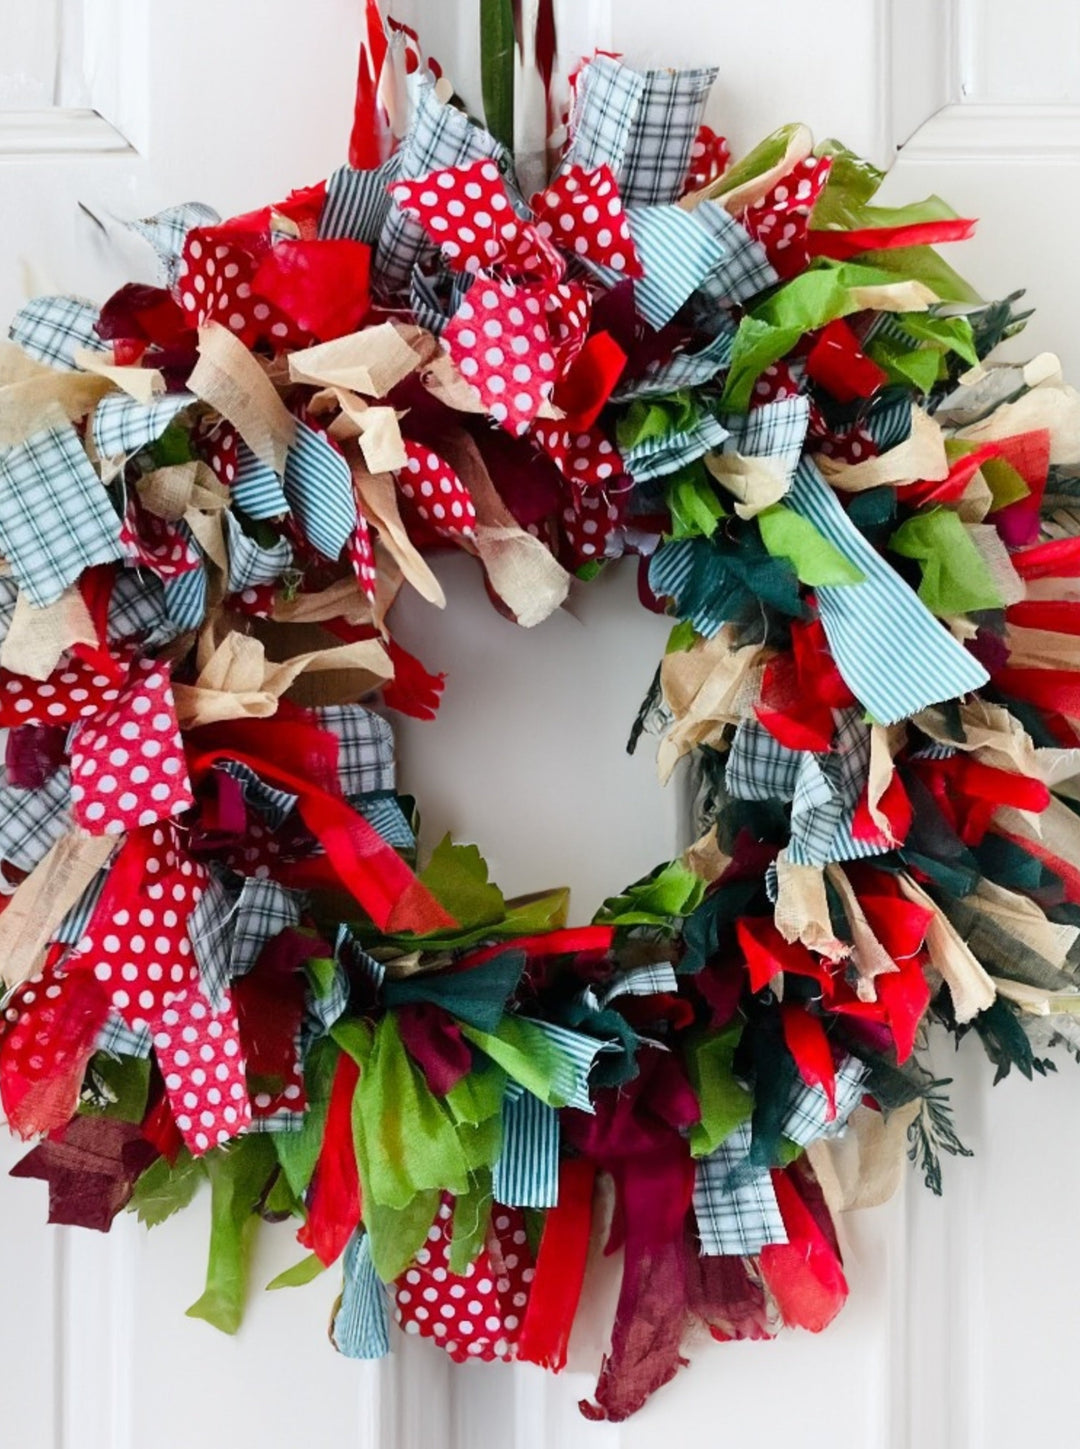 Christmas Wreath Hand Made with Festive Fabric of Red and Green - Round 30cm Diameter